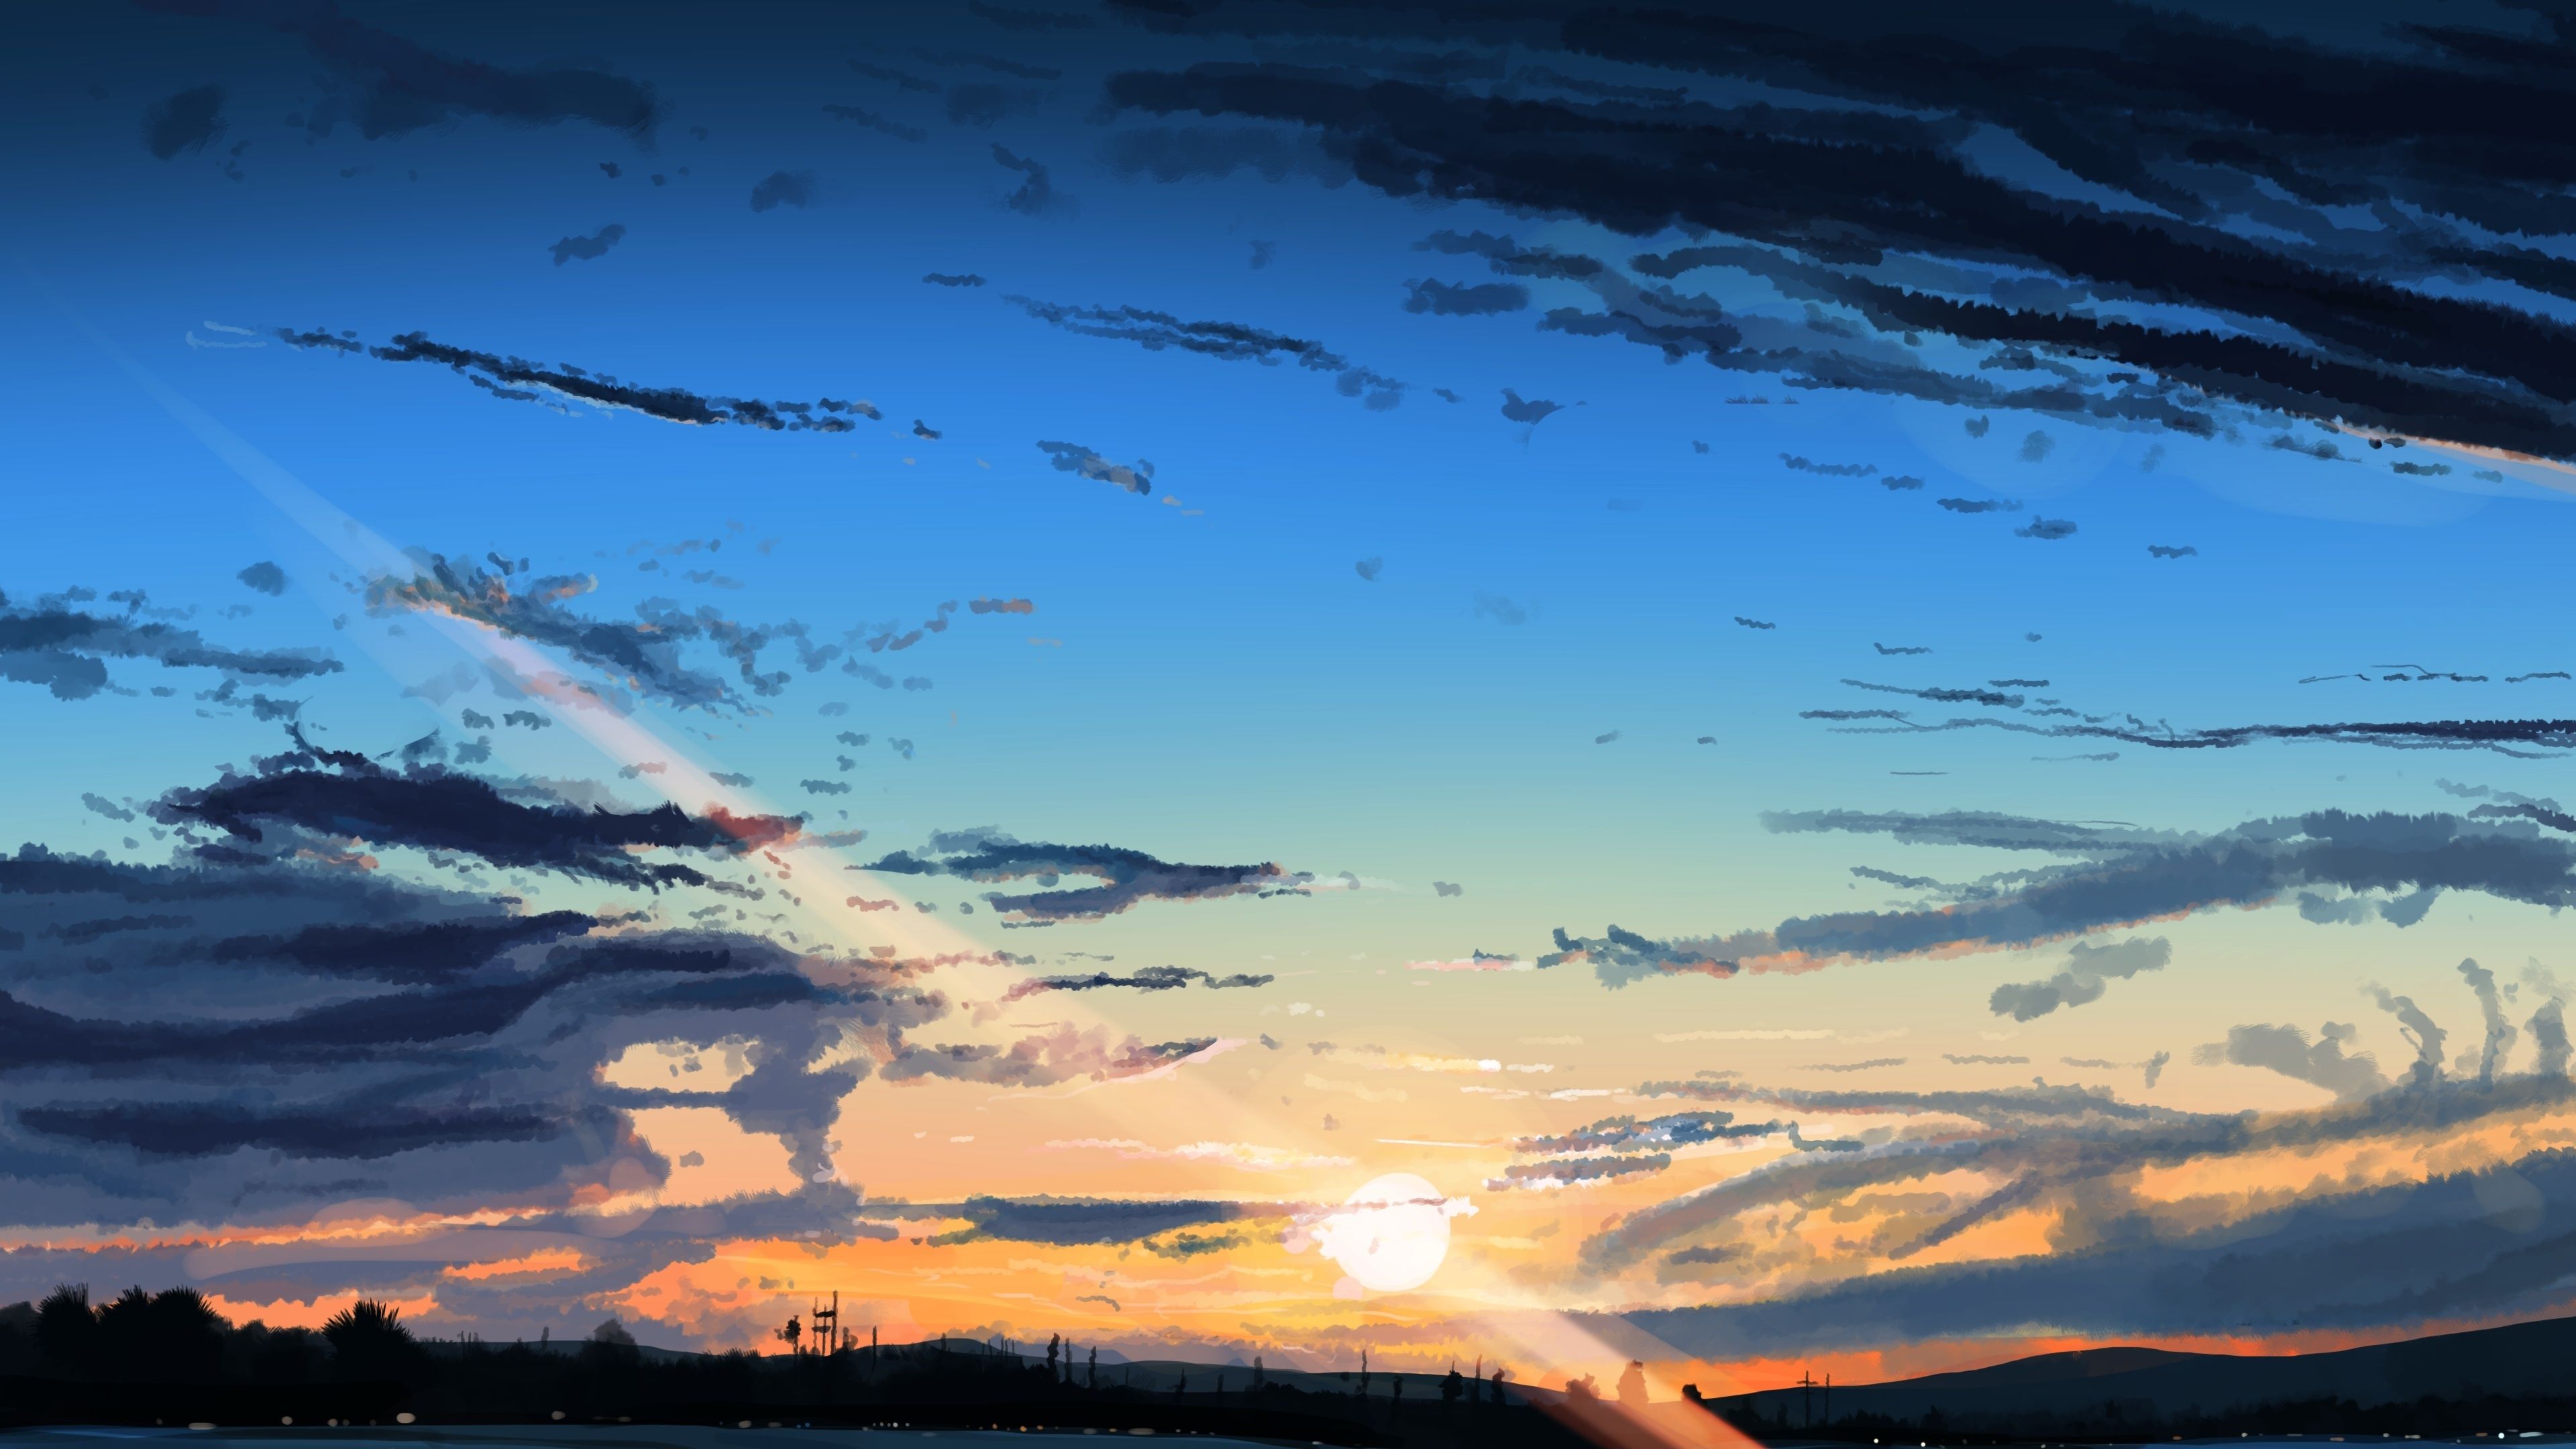 Anime Sunset 4k Ultra HD Wallpaper by Abyss